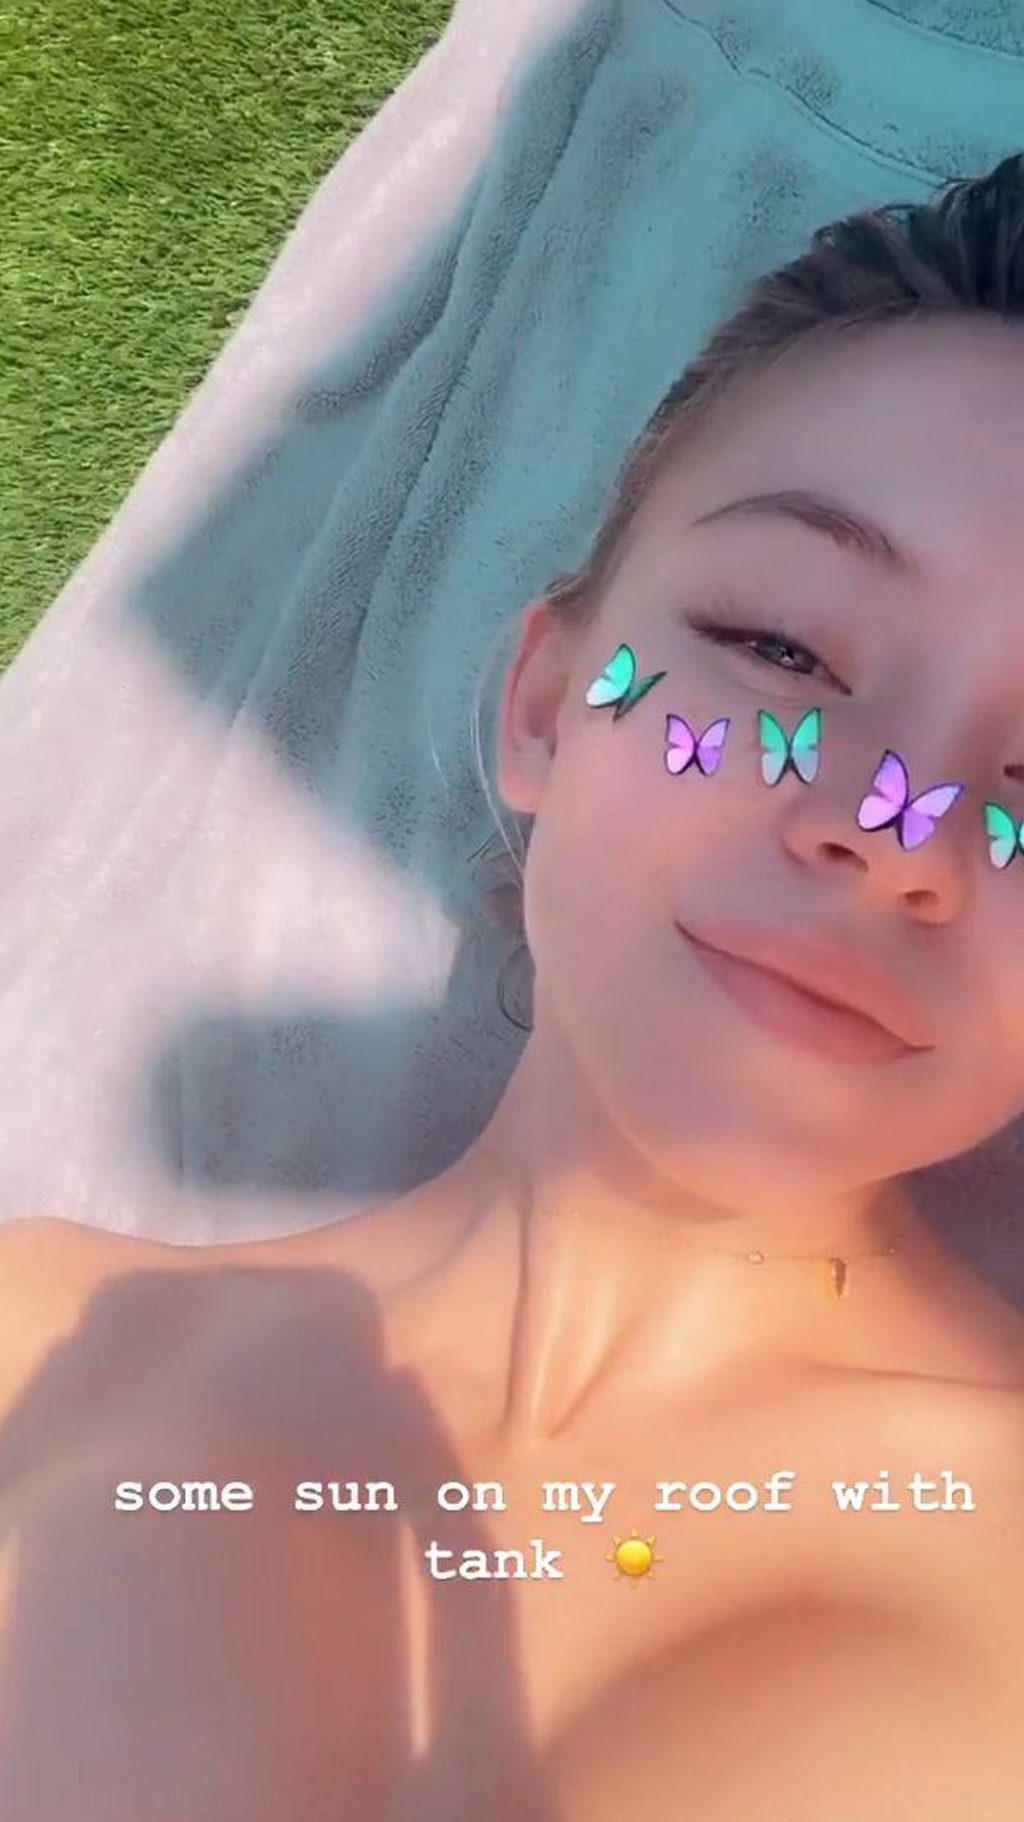 Sydney Sweeney Gives a Good Mood and Her Boobs (4 Pics + GIF)